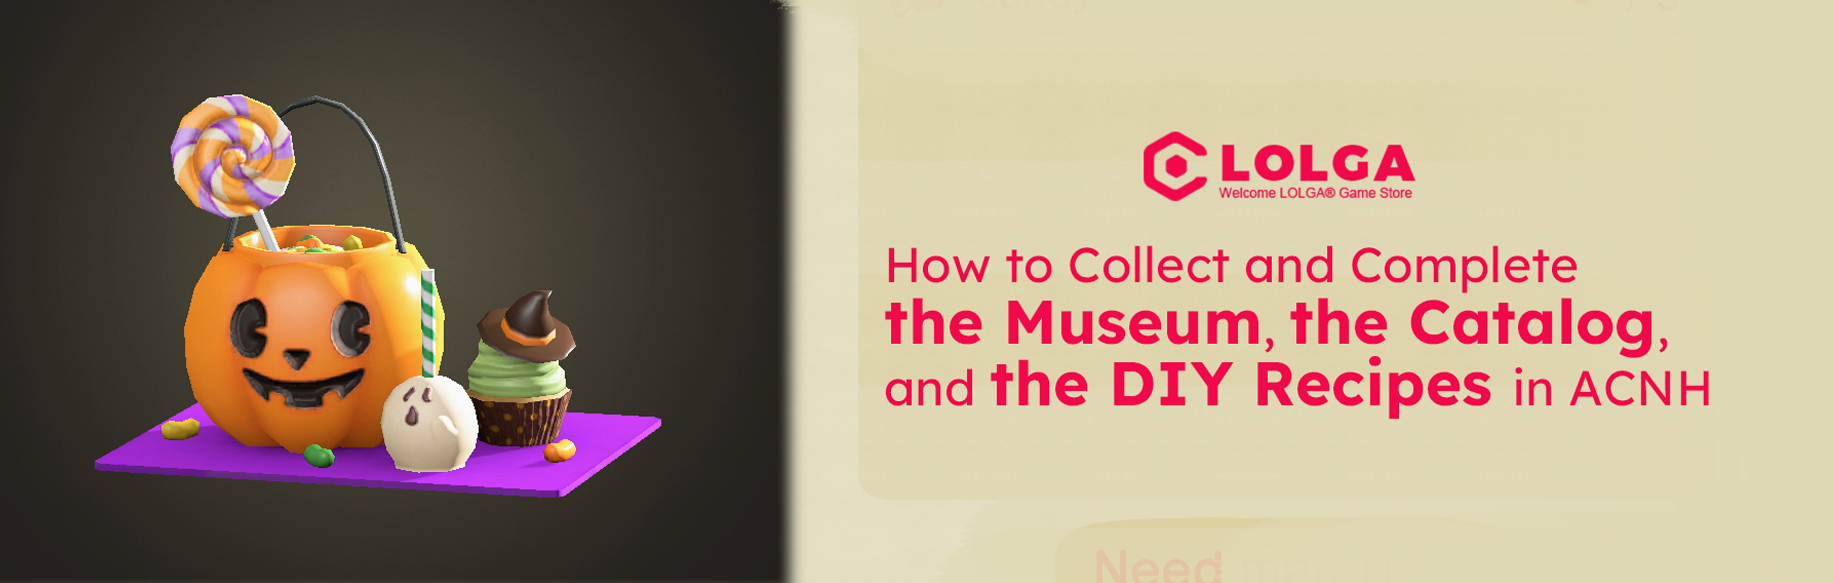 How to Collect and Complete the Museum, the Catalog, and the DIY Recipes in ACNH